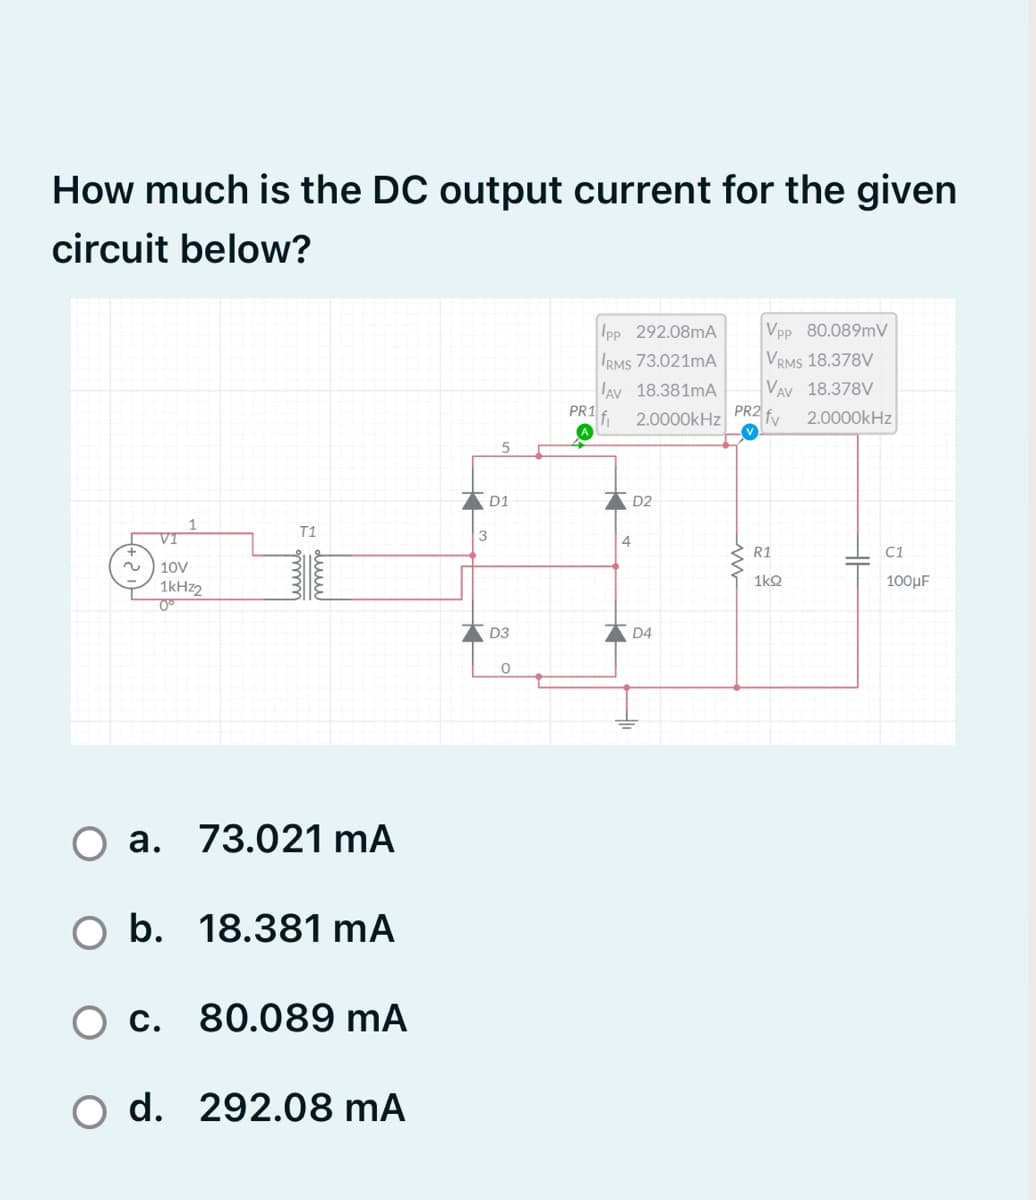 How much is the DC output current for the given
circuit below?
Ipp 292.08mA
Vpp 80.089mV
VRMS 18.378V
VAV 18.378V
IRMS 73.021MA
AV 18.381mA
PR1
fi
2.0000kHz PR2 fv
2.0000kHz
D1
D2
VI
T1
3
4
R1
C1
2.
10V
1kHz2
1k2
100µF
D3
D4
a. 73.021 mA
O b. 18.381 mA
c. 80.089 mA
d. 292.08 mA
